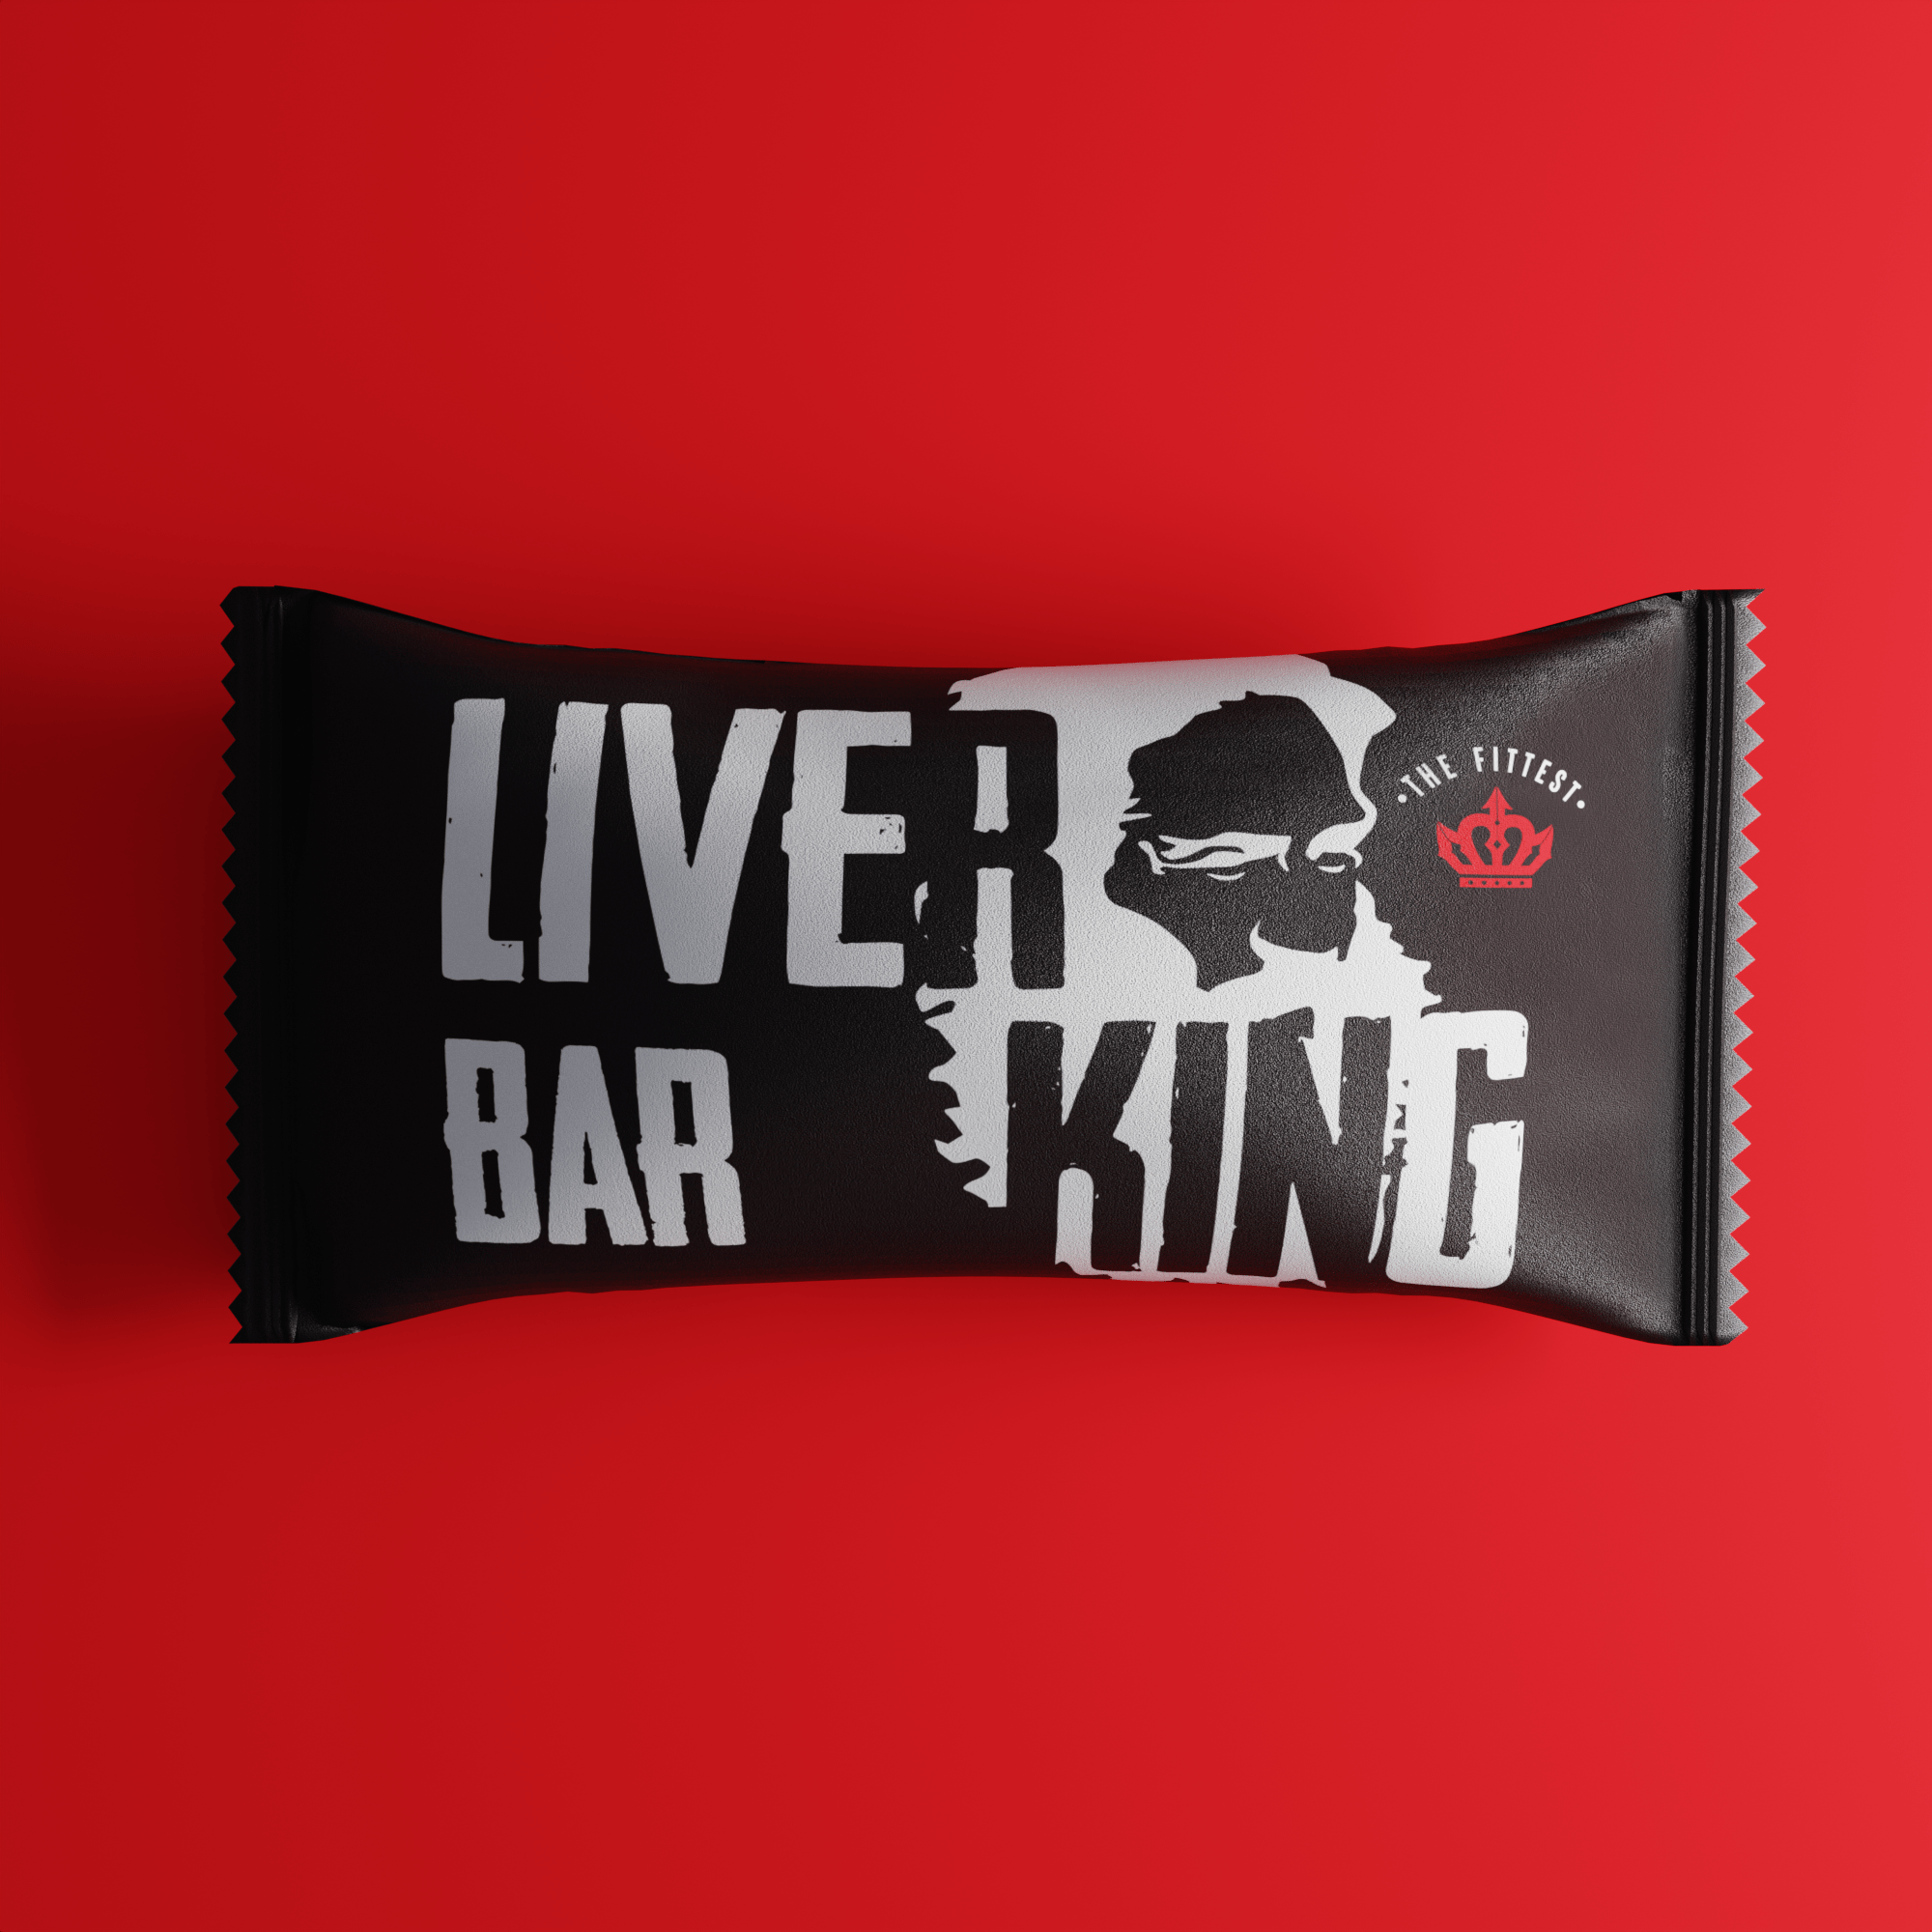 Liver King bar in front of a red background